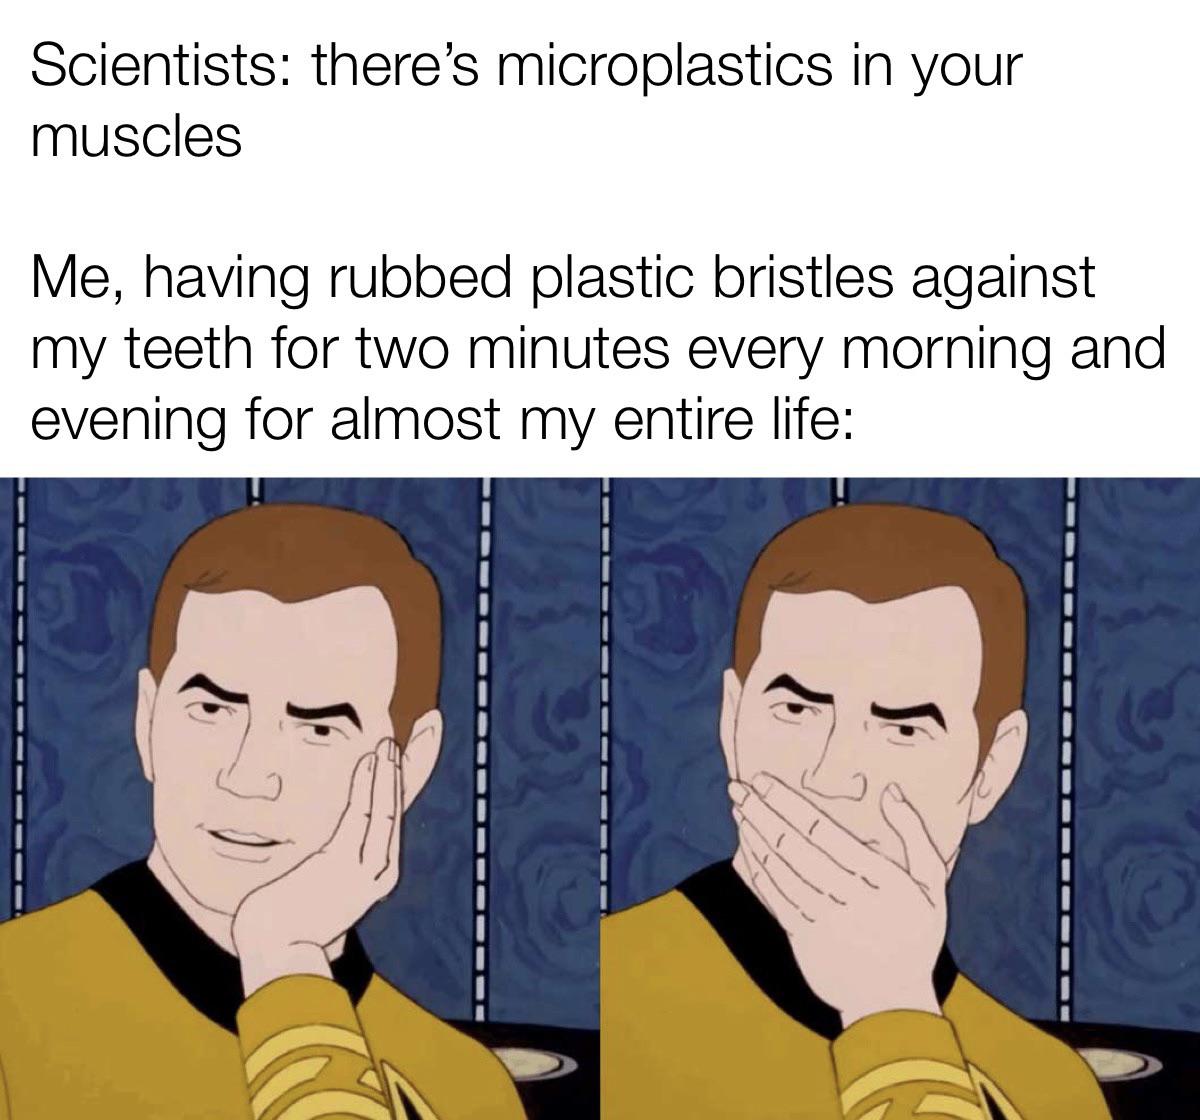 dank memes - you don t say meme - Scientists there's microplastics in your muscles Me, having rubbed plastic bristles against my teeth for two minutes every morning and evening for almost my entire life F